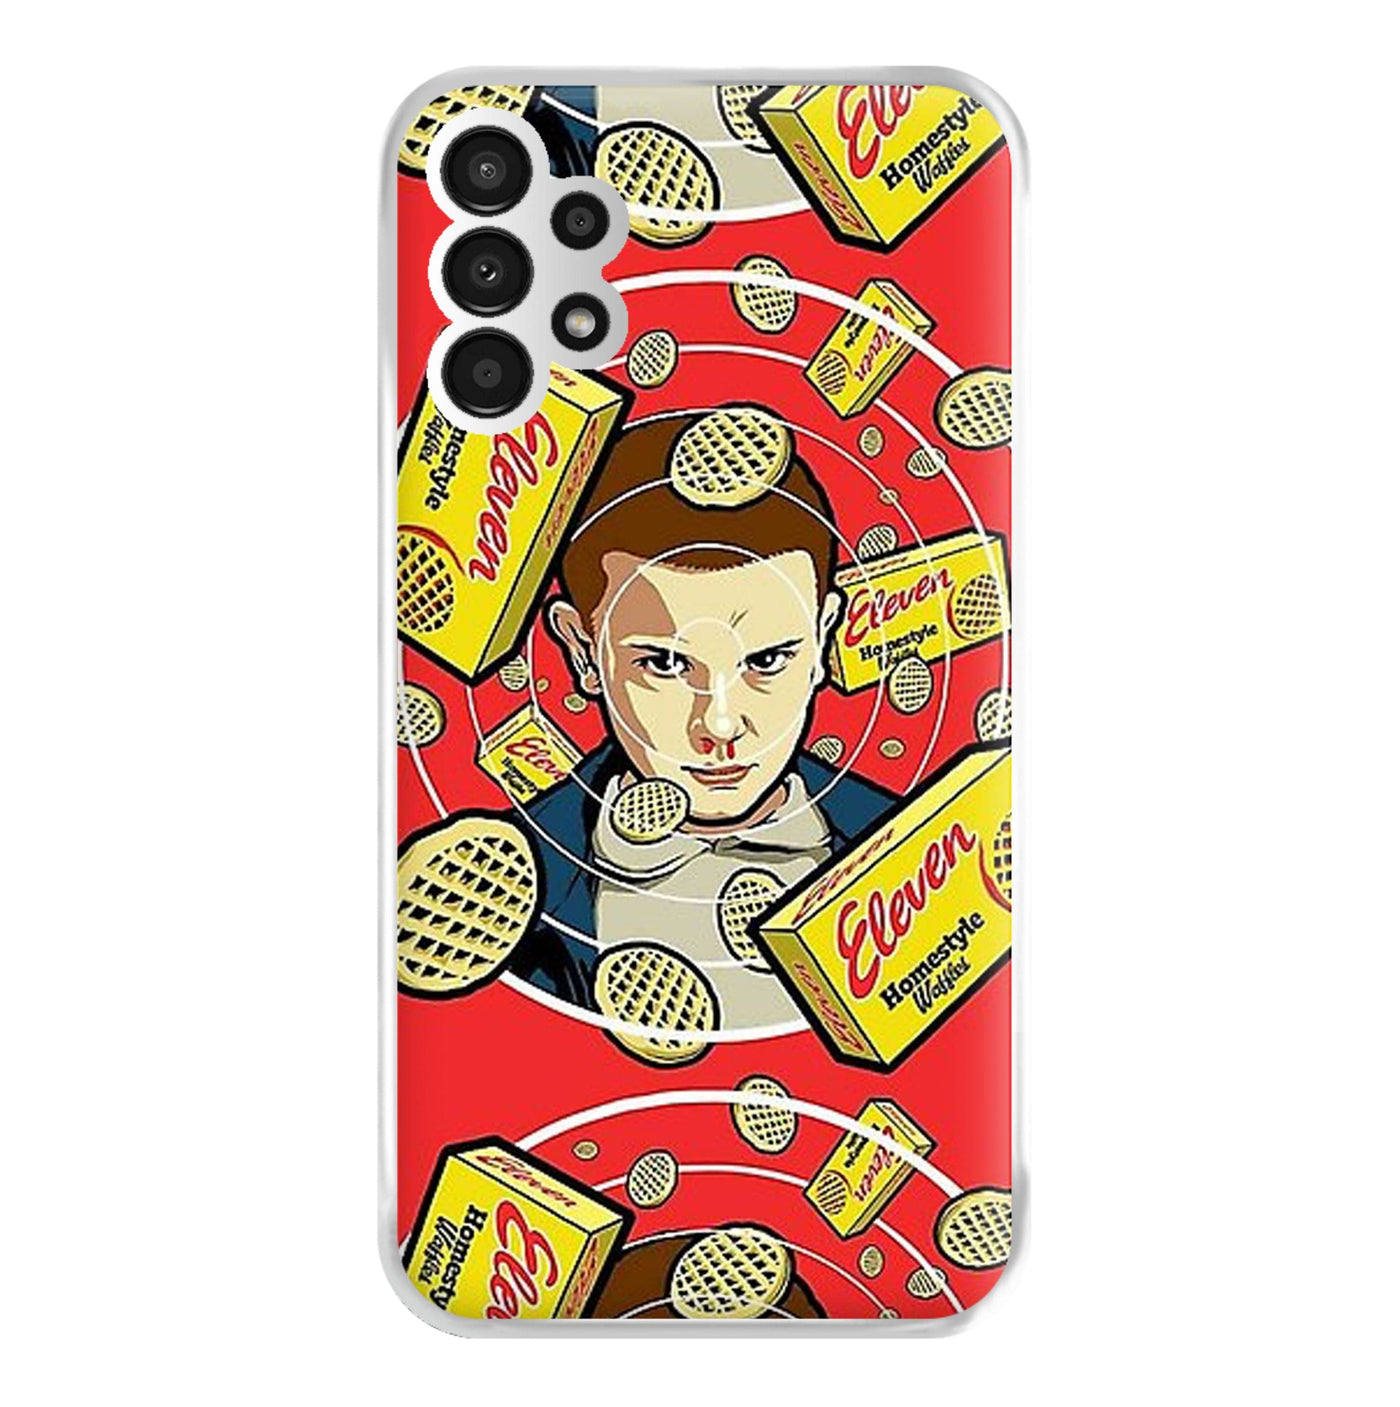 Eleven and Waffles - Stranger Things Phone Case